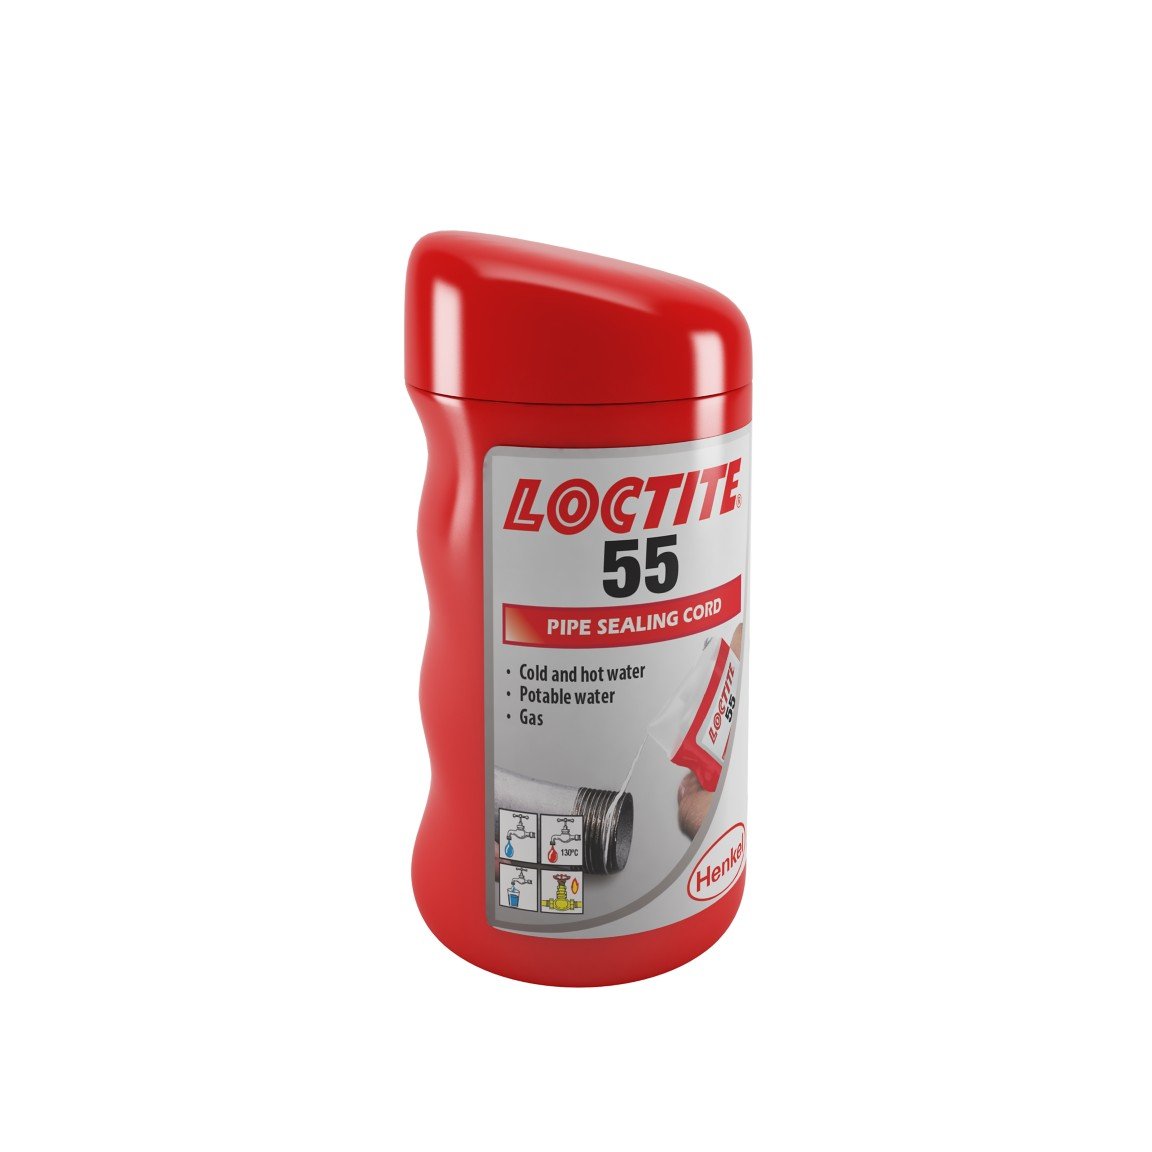 Loctite 55 Pipe Thread Sealing Cord 160 Metres for Hot or Cold Water and Gas - NPH Plumbing And Heating - nphplumbingandheating.co.uk